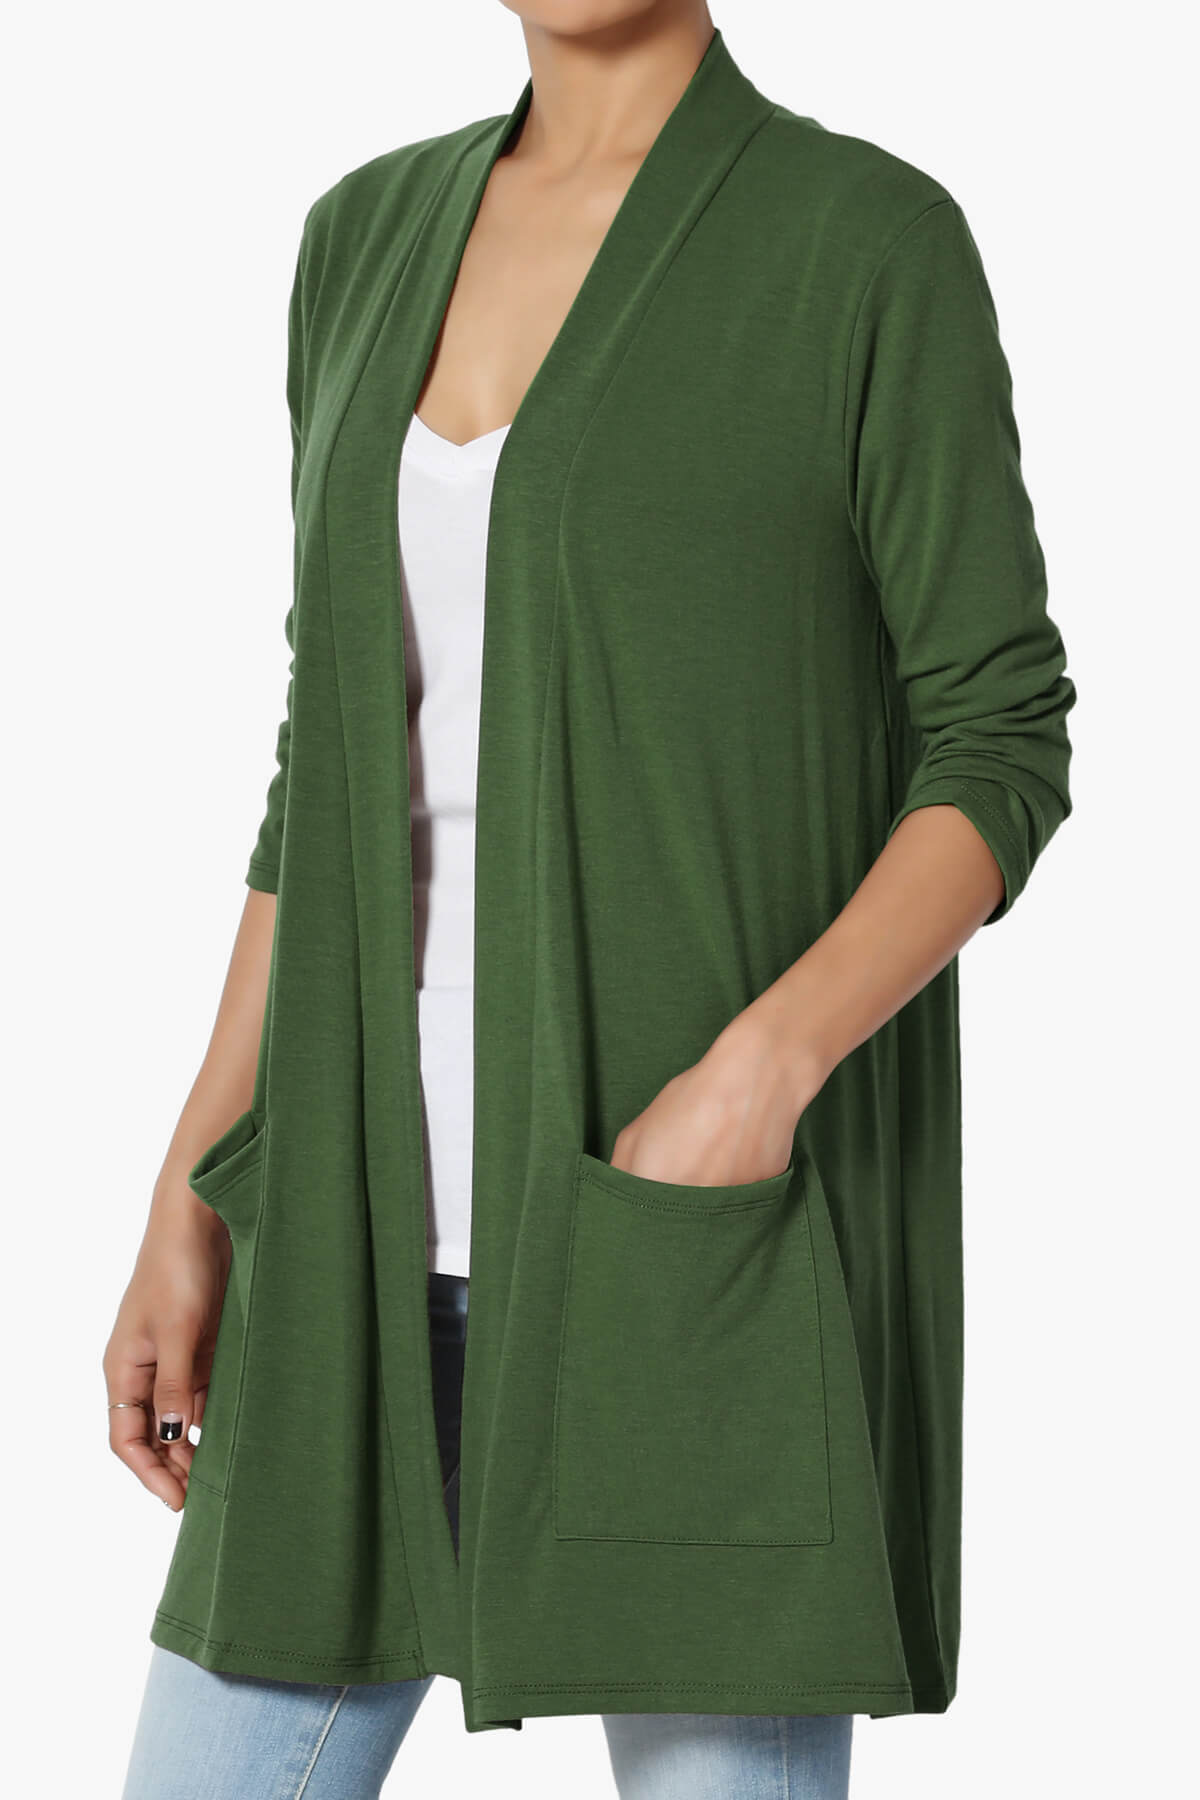 Load image into Gallery viewer, Daday Slouchy Pocket 3/4 Sleeve Cardigan ARMY GREEN_3
